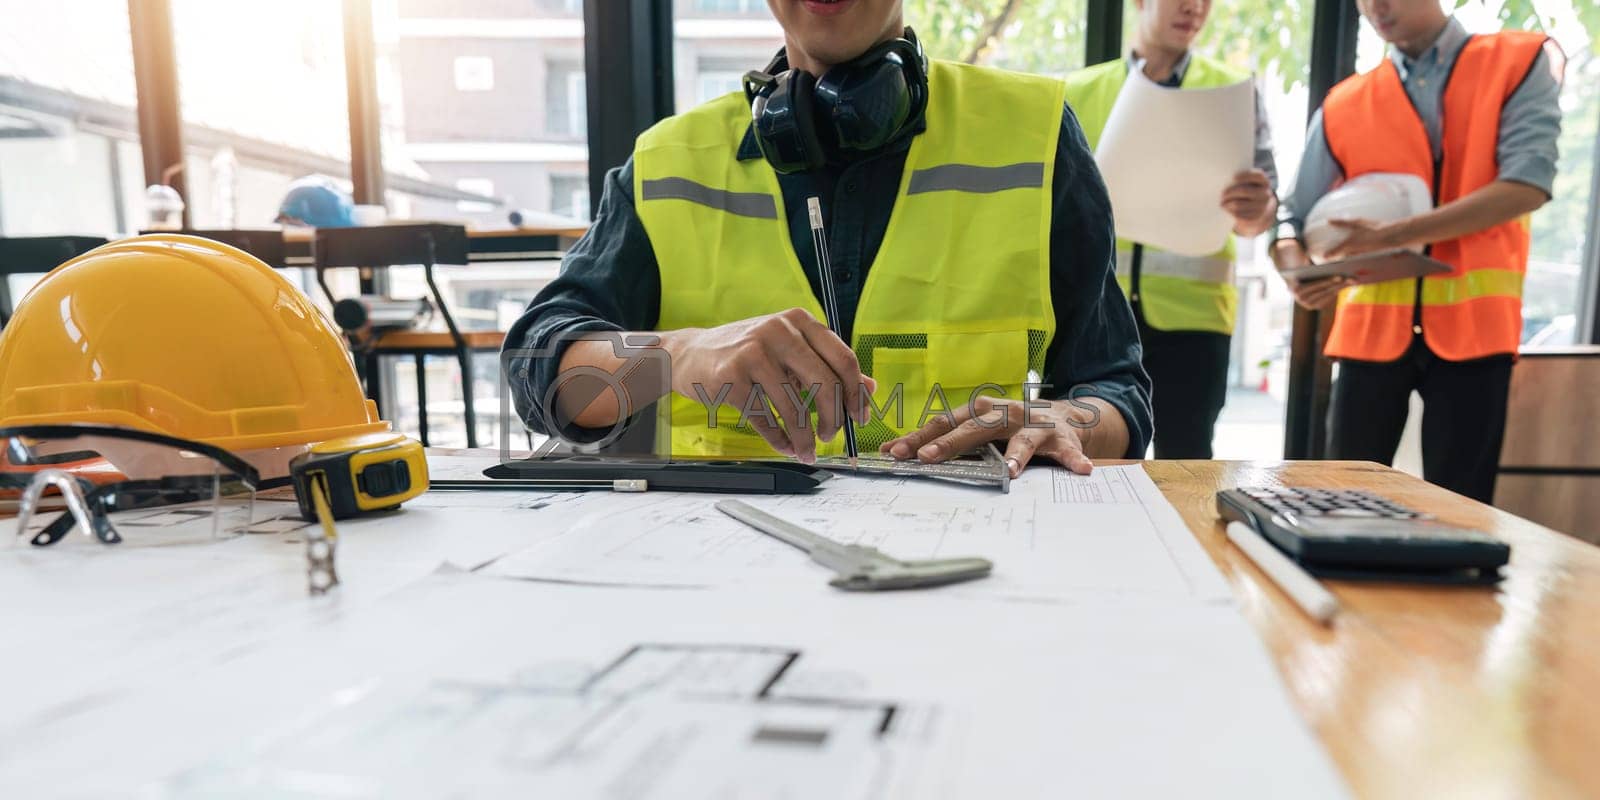 Royalty free image of engineer working on blueprints and construction plans. Building engineers calculate and draft building construction drawings, civil engineering, and construction business concepts by nateemee